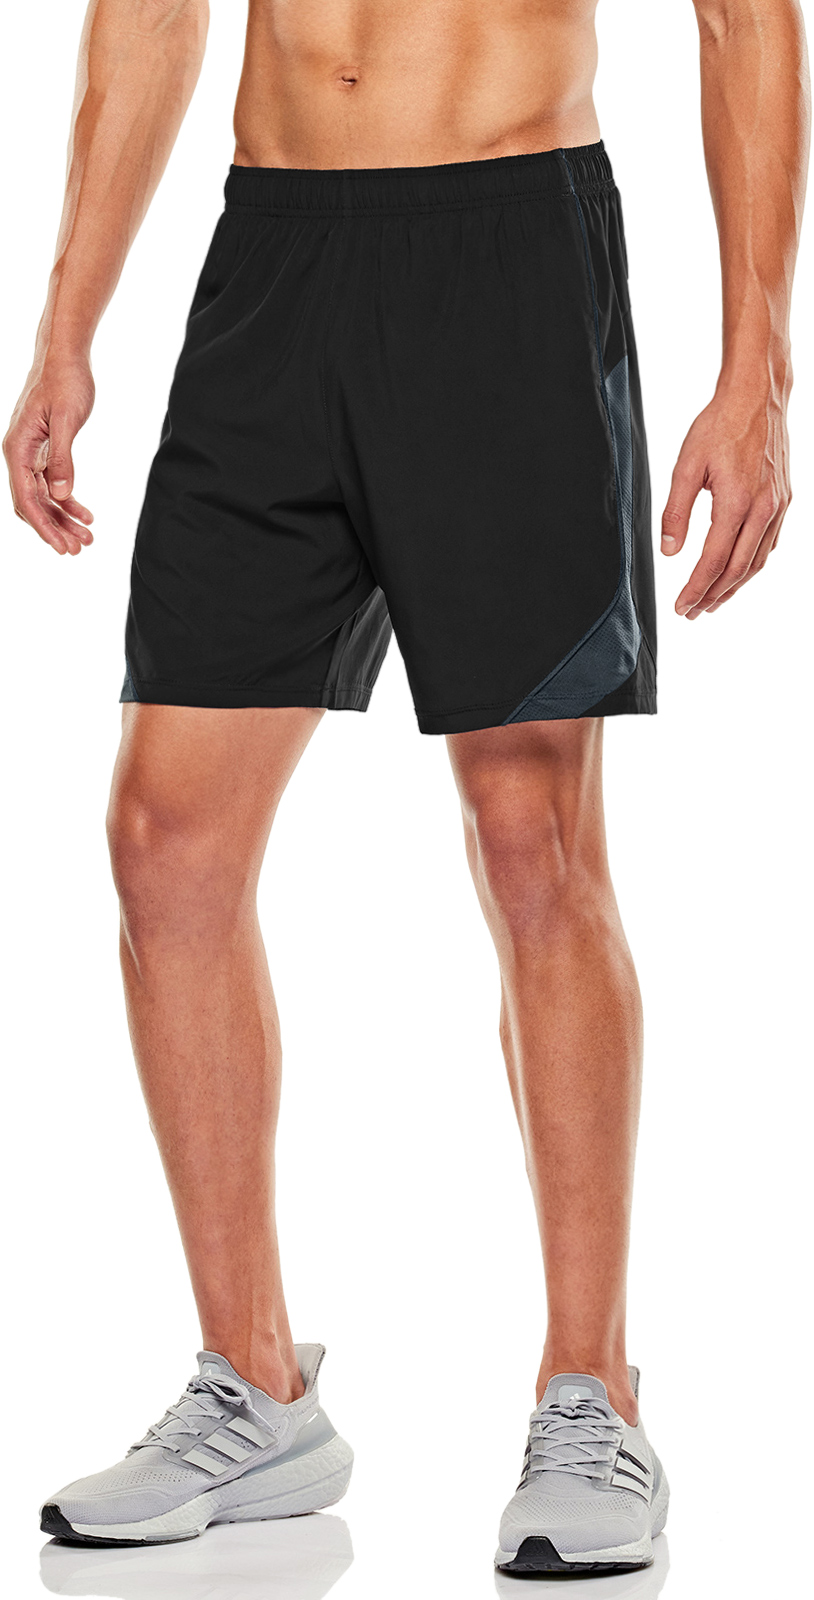 TSLA Mens Active Running Shorts 3 Inch Quick Dry Mesh Jogging Workout ...